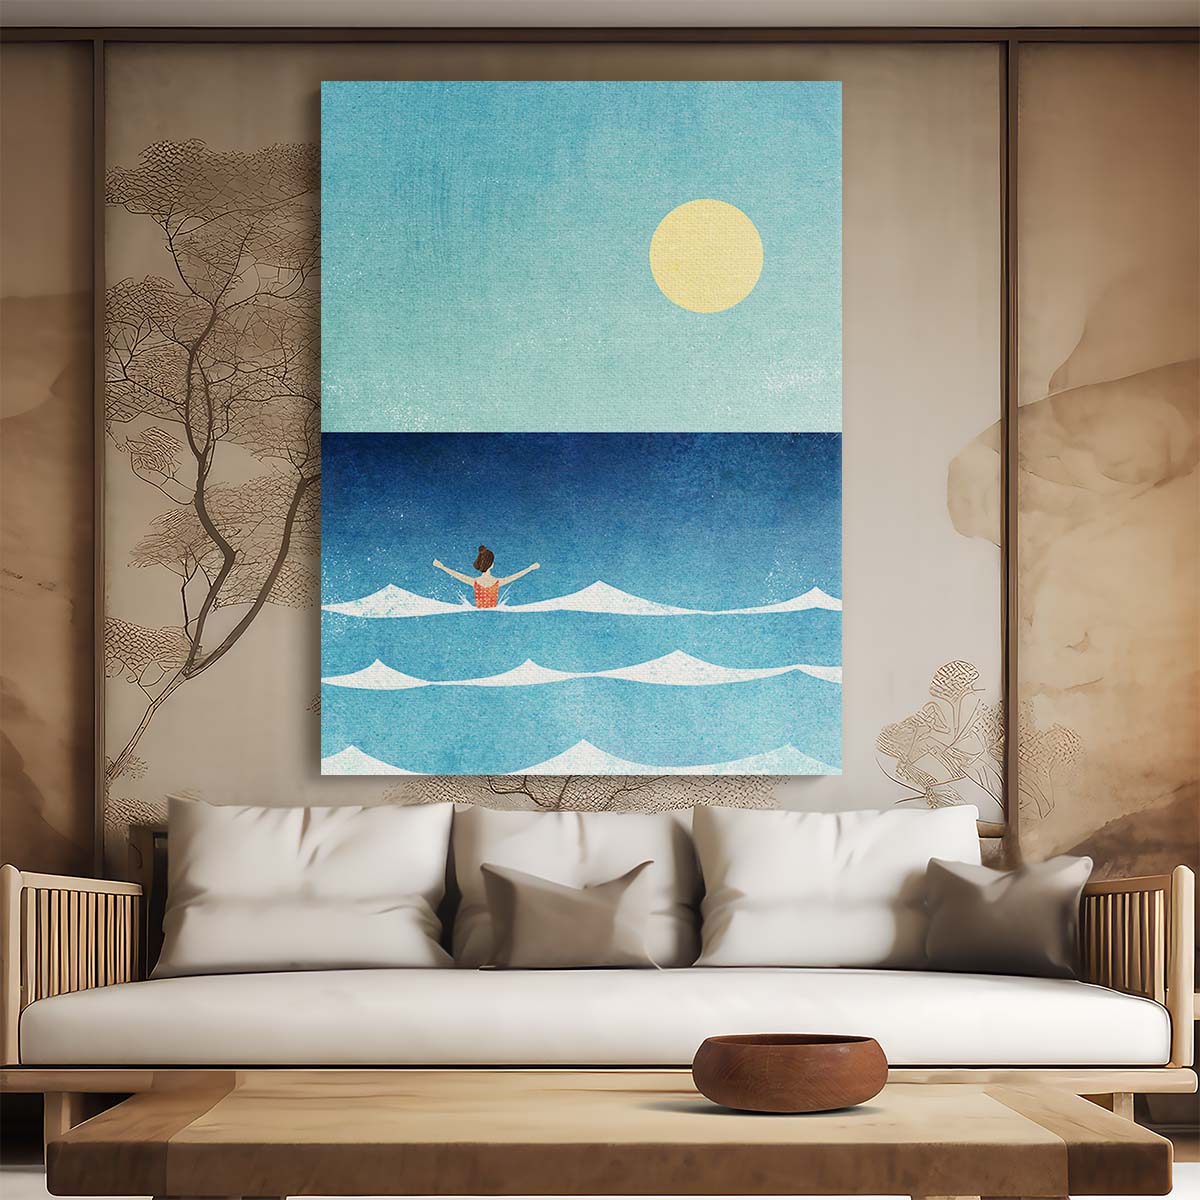 Colorful Ocean Wave Landscape Photography - Sea Swim Woman by Luxuriance Designs, made in USA